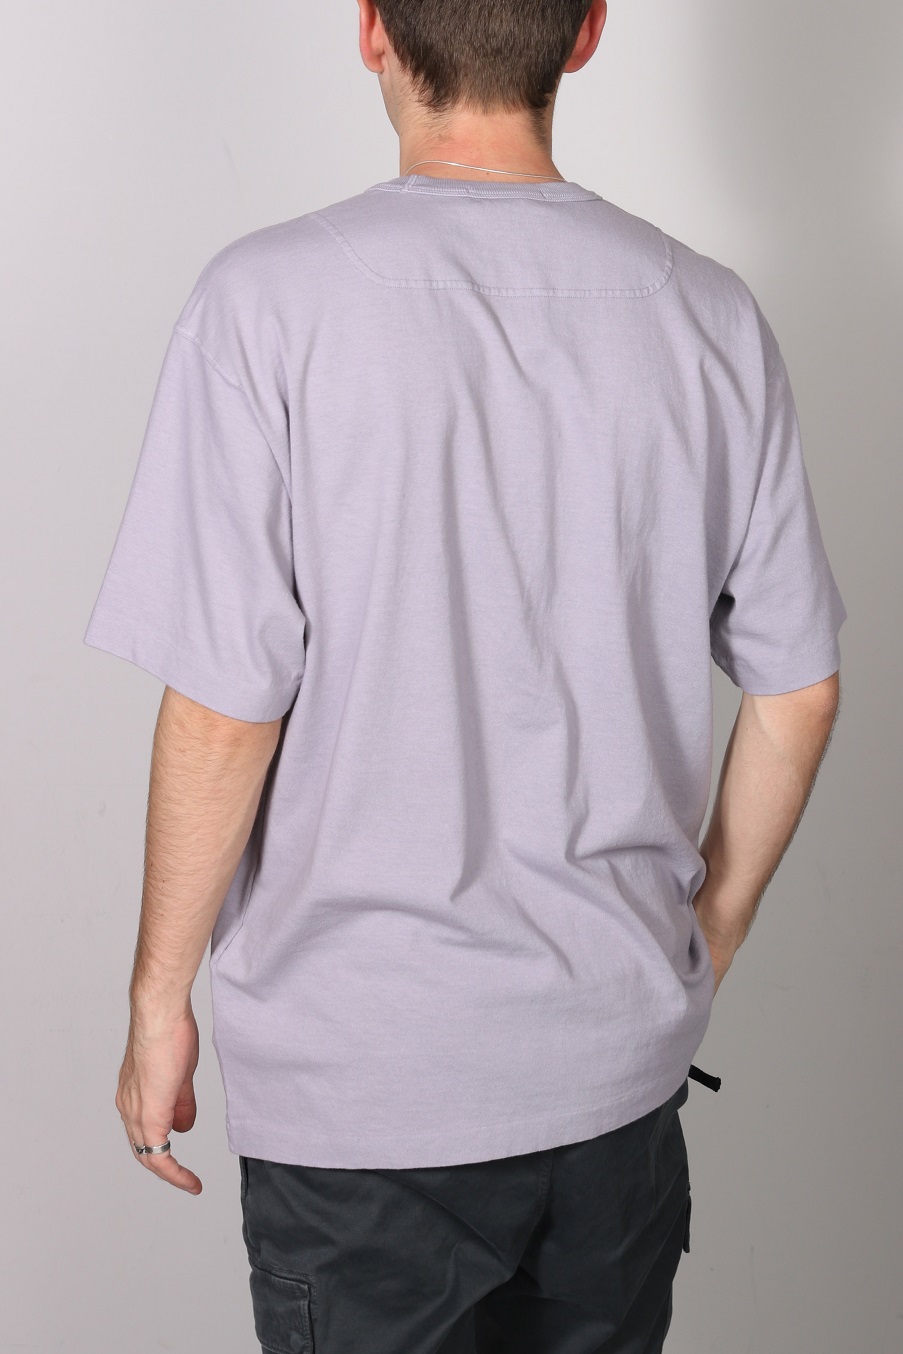 STONE ISLAND Oversized Stamp T-Shirt in Lavender 2XL